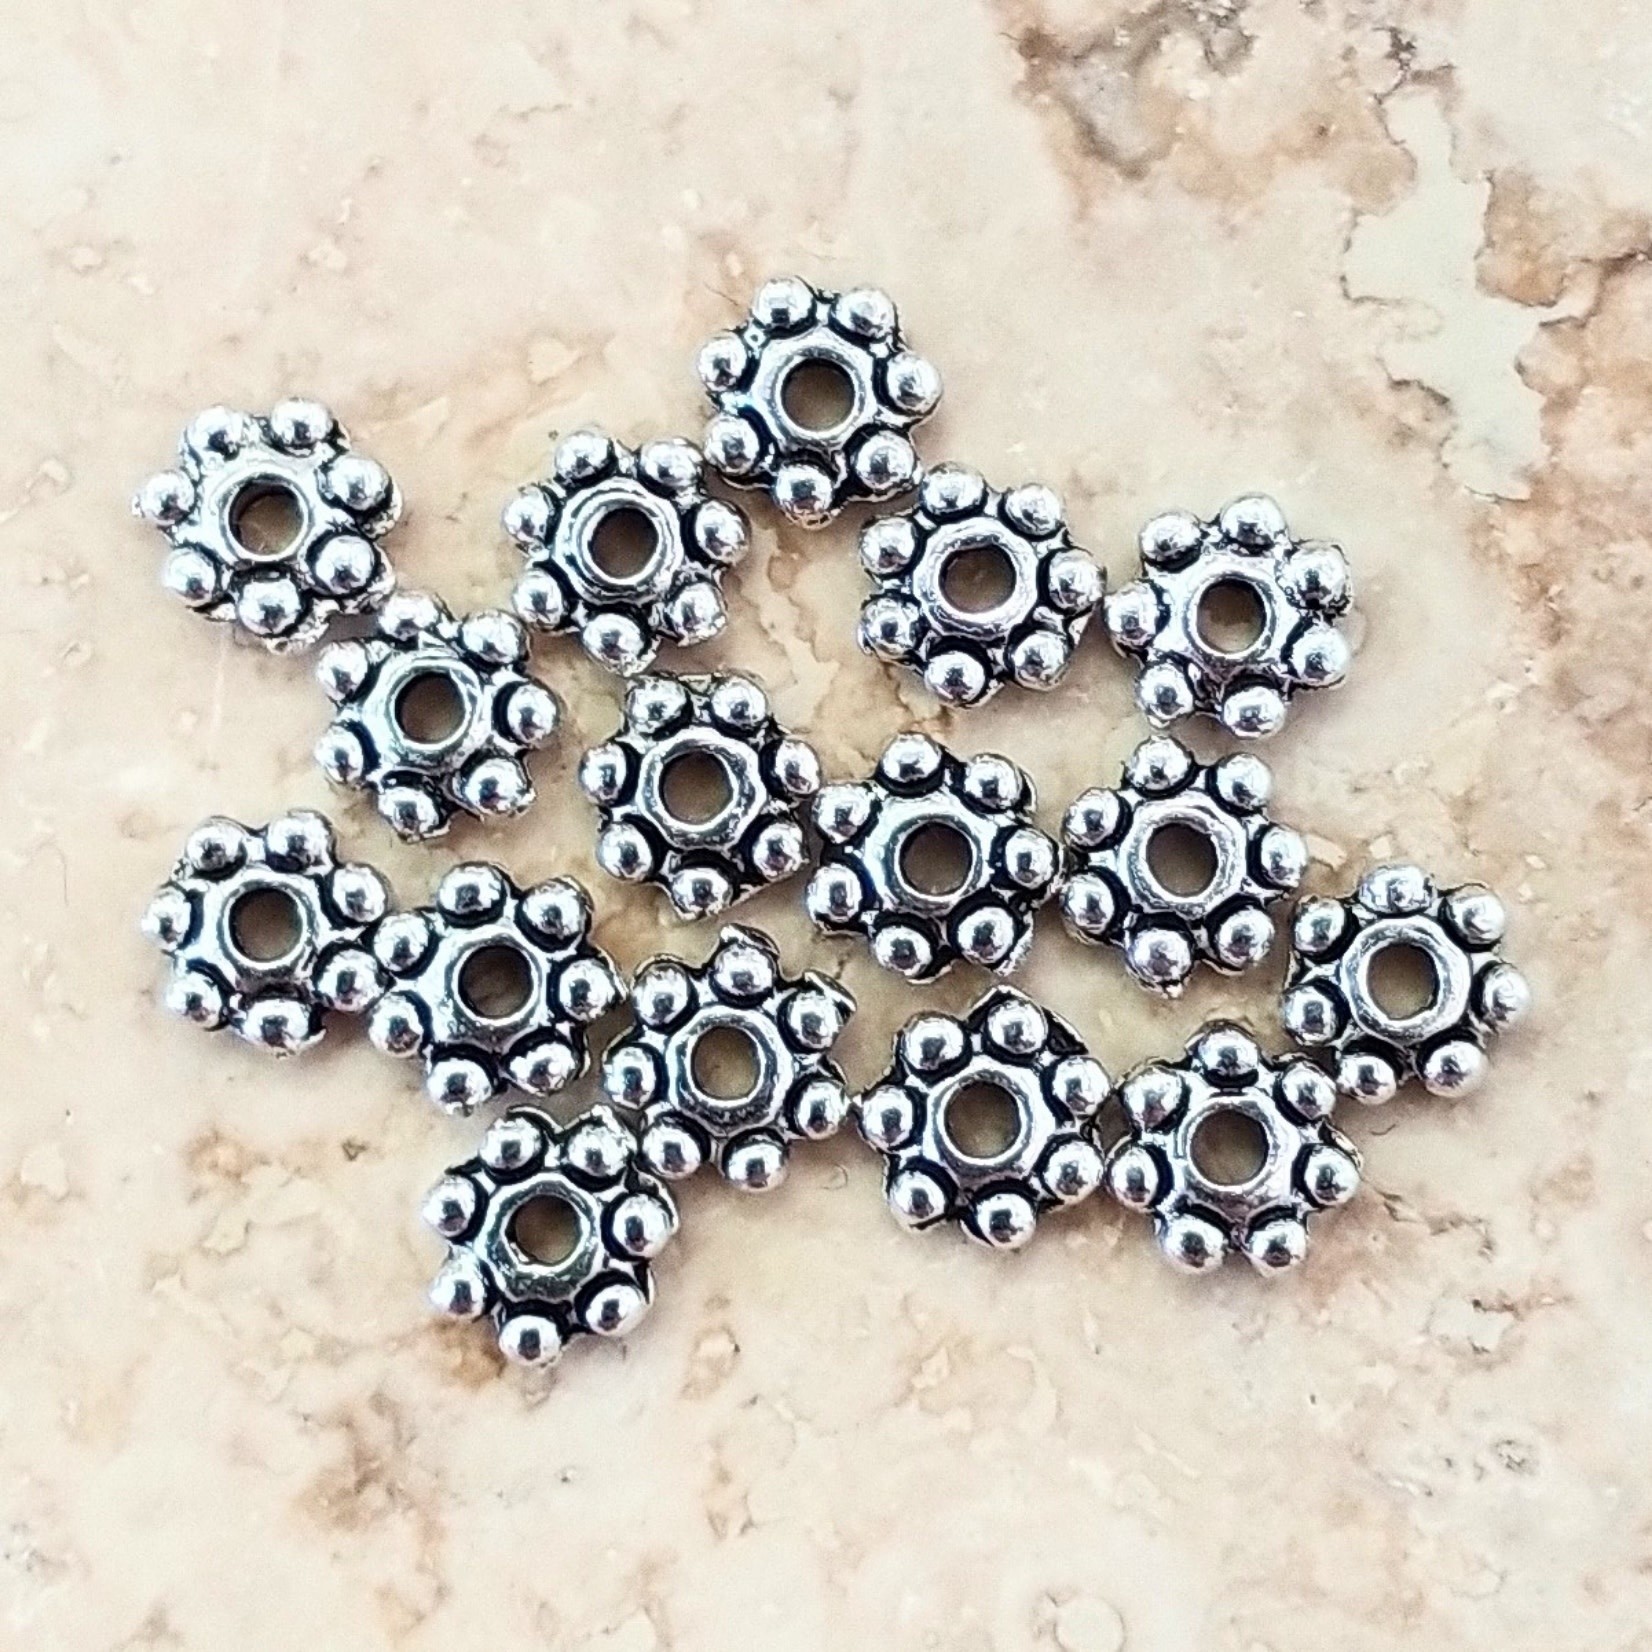 Pewter 4mm Daisy Spacers - 100 Pieces